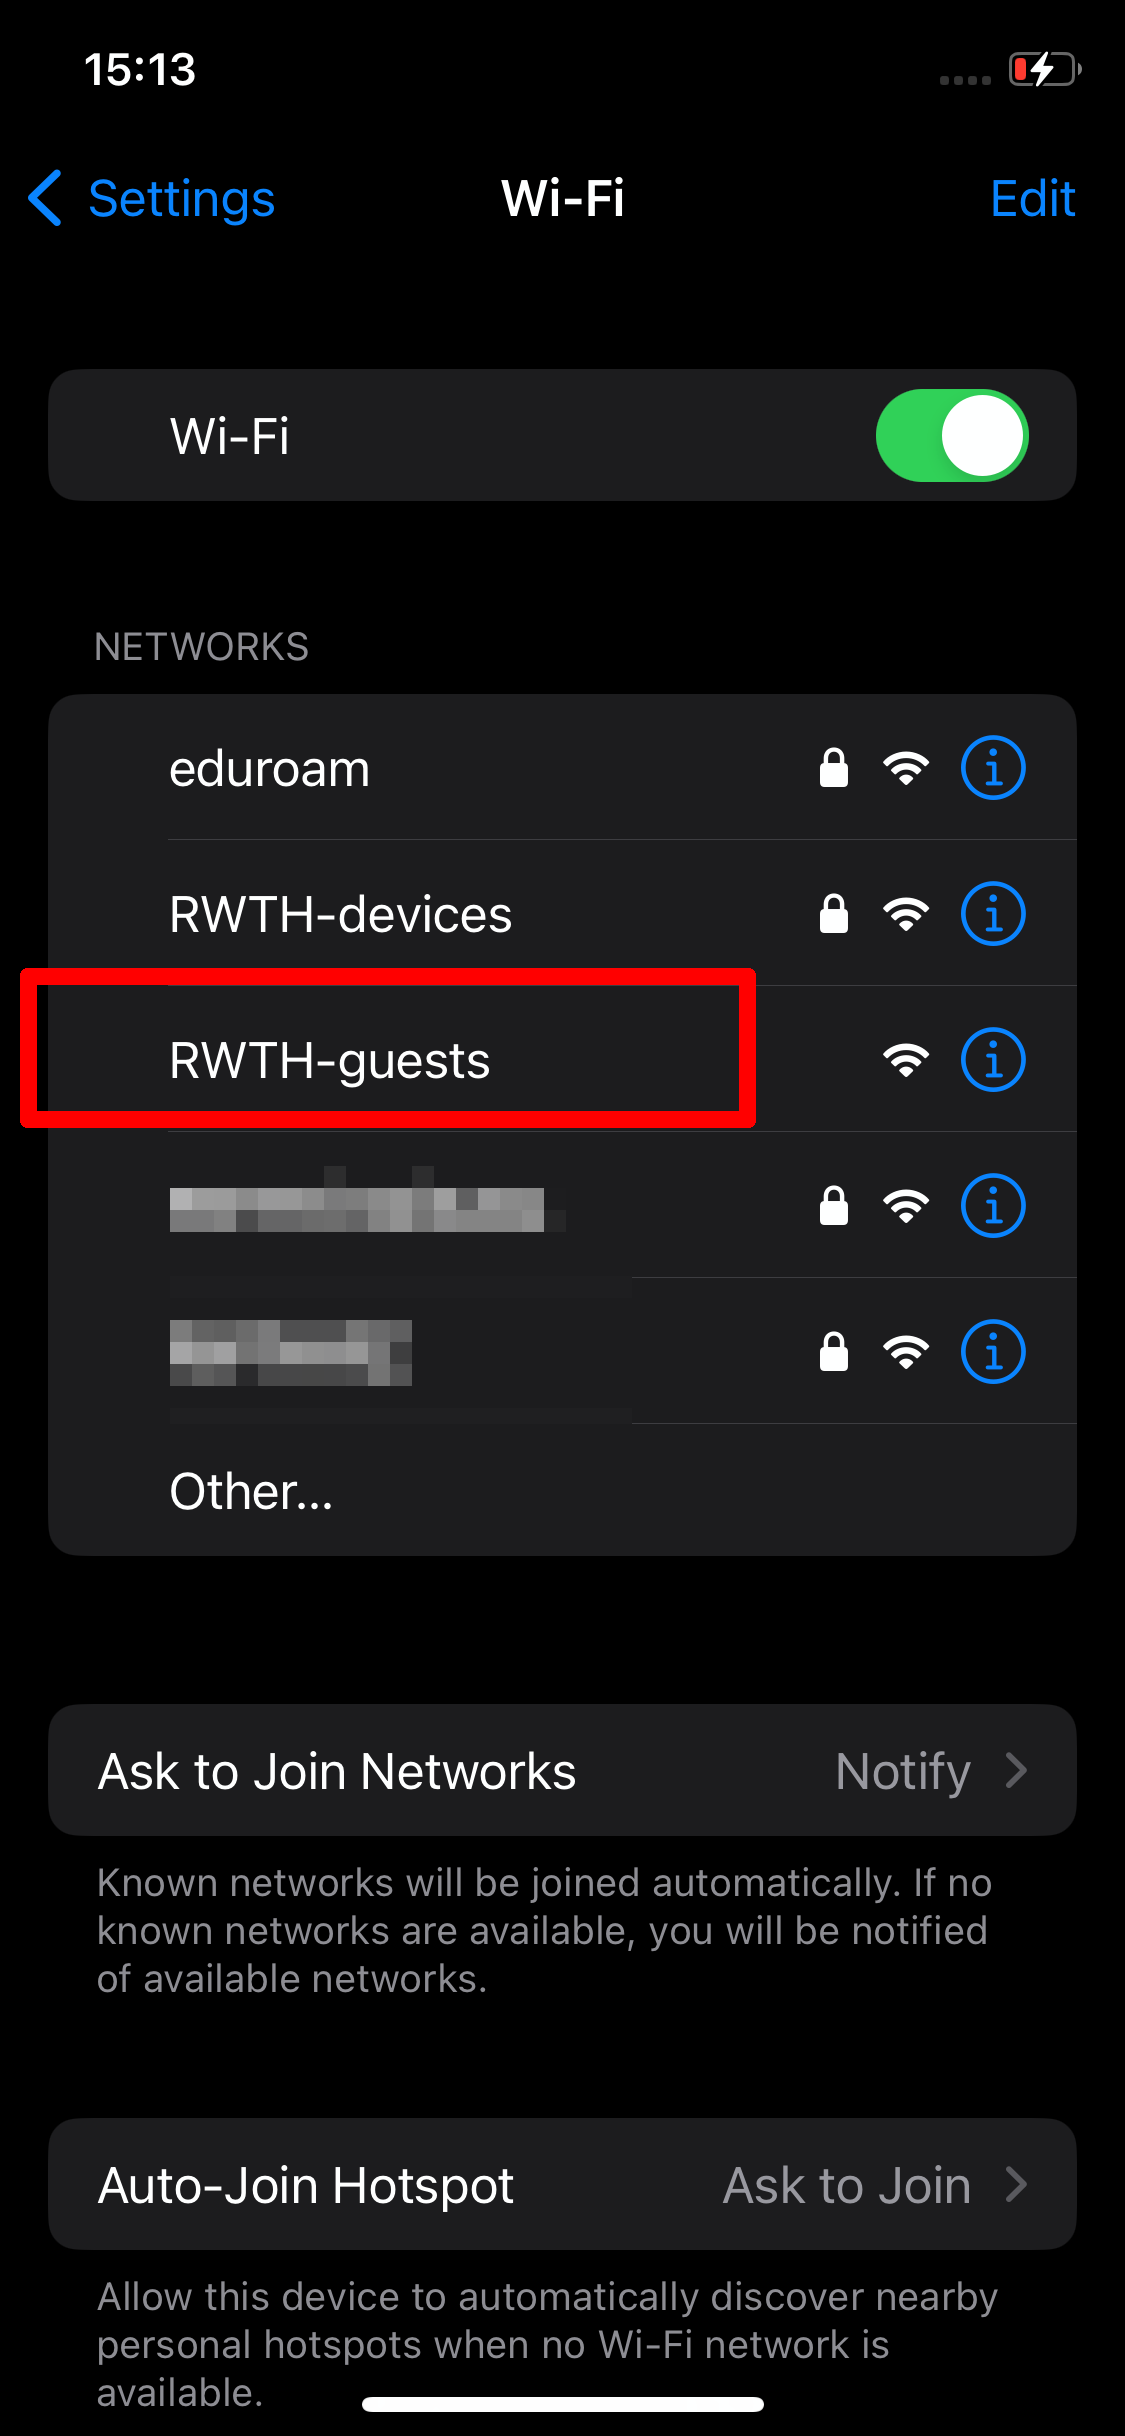 Join the RWTH-guests network